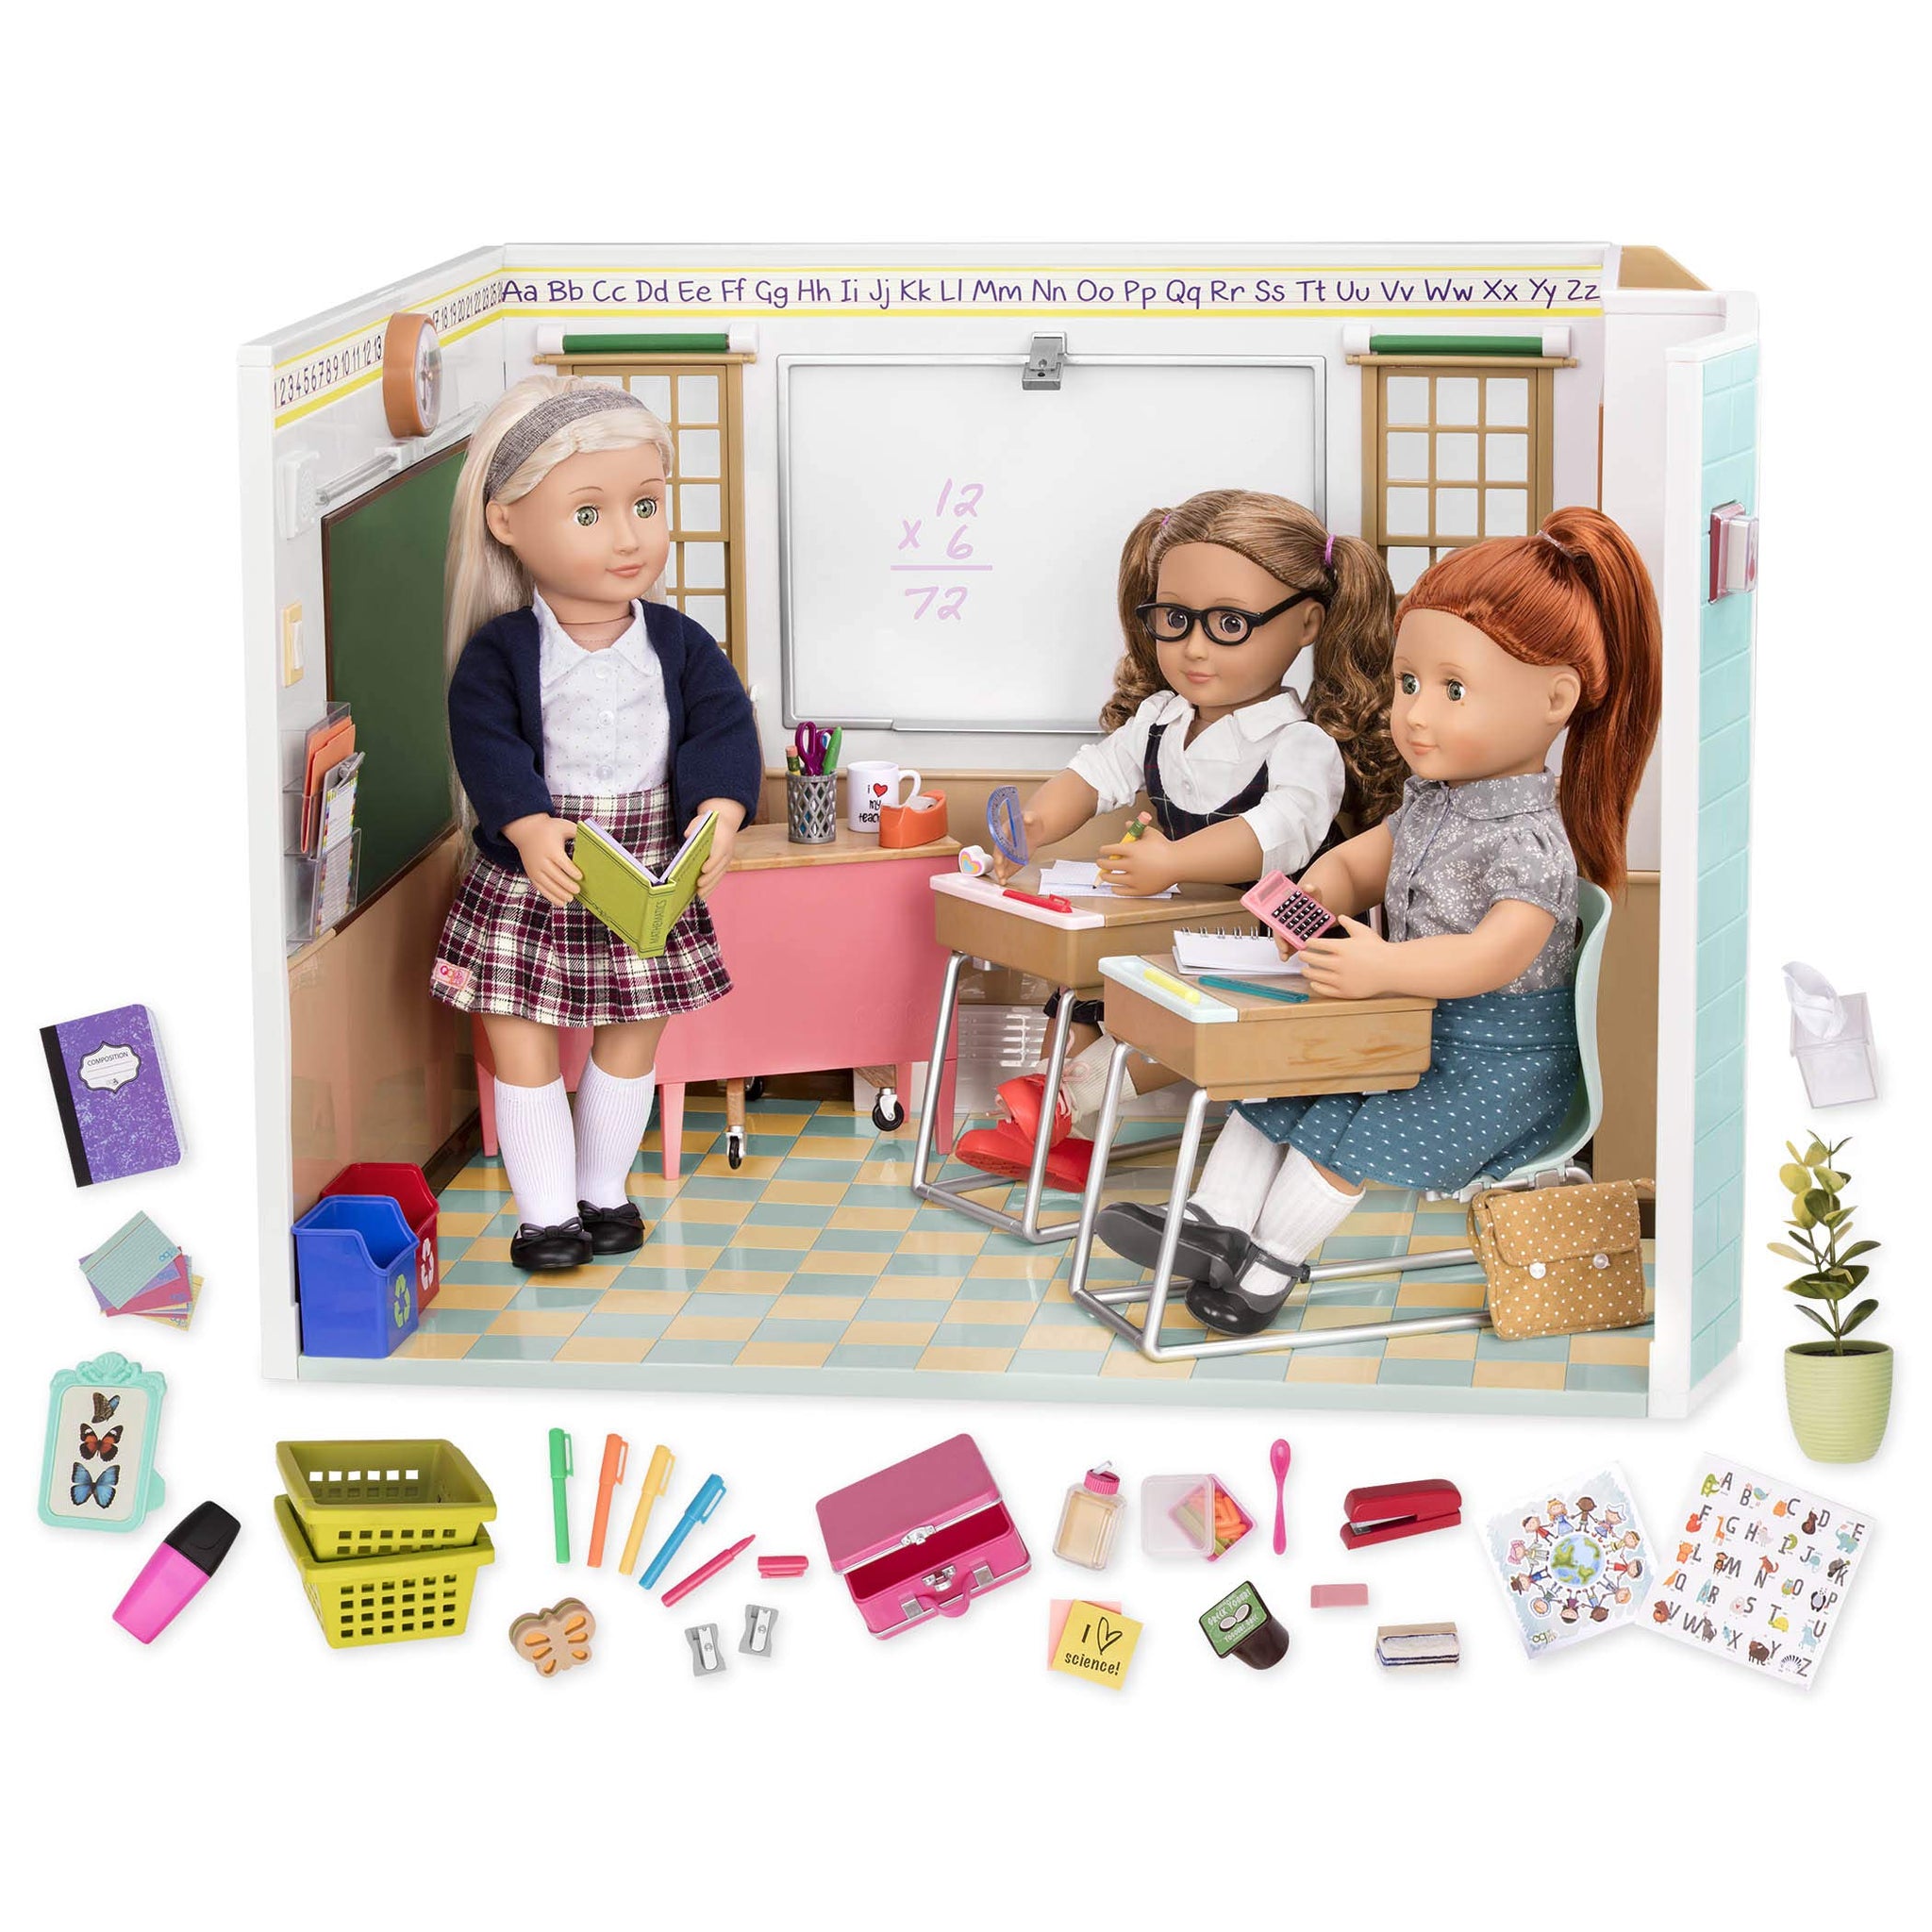 our generation school science set